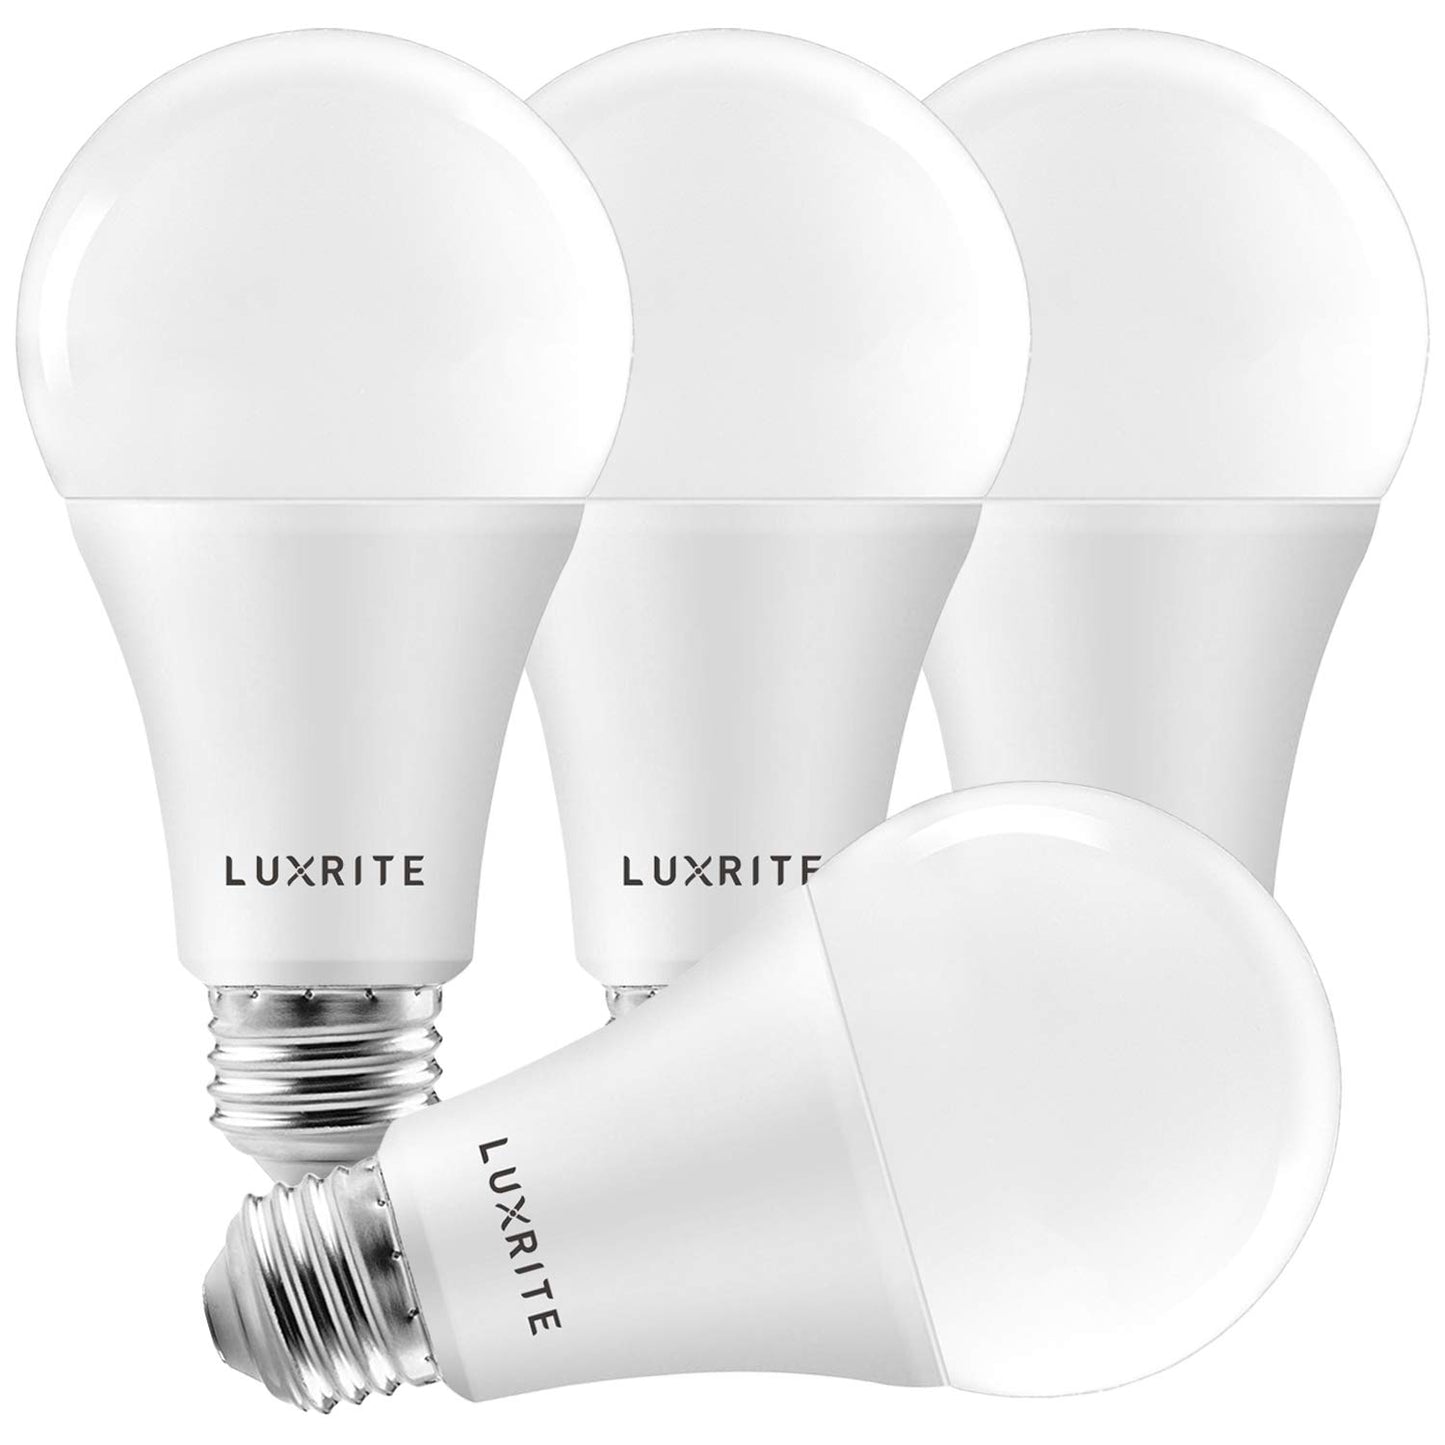 Luxrite LR21450 A21 LED Bulb 150 Watt Equivalent, 2550 Lumens, 2700K Soft White, Enclosed Fixture Rated, Dimmable Standard LED Bulb 22W, E26 Base